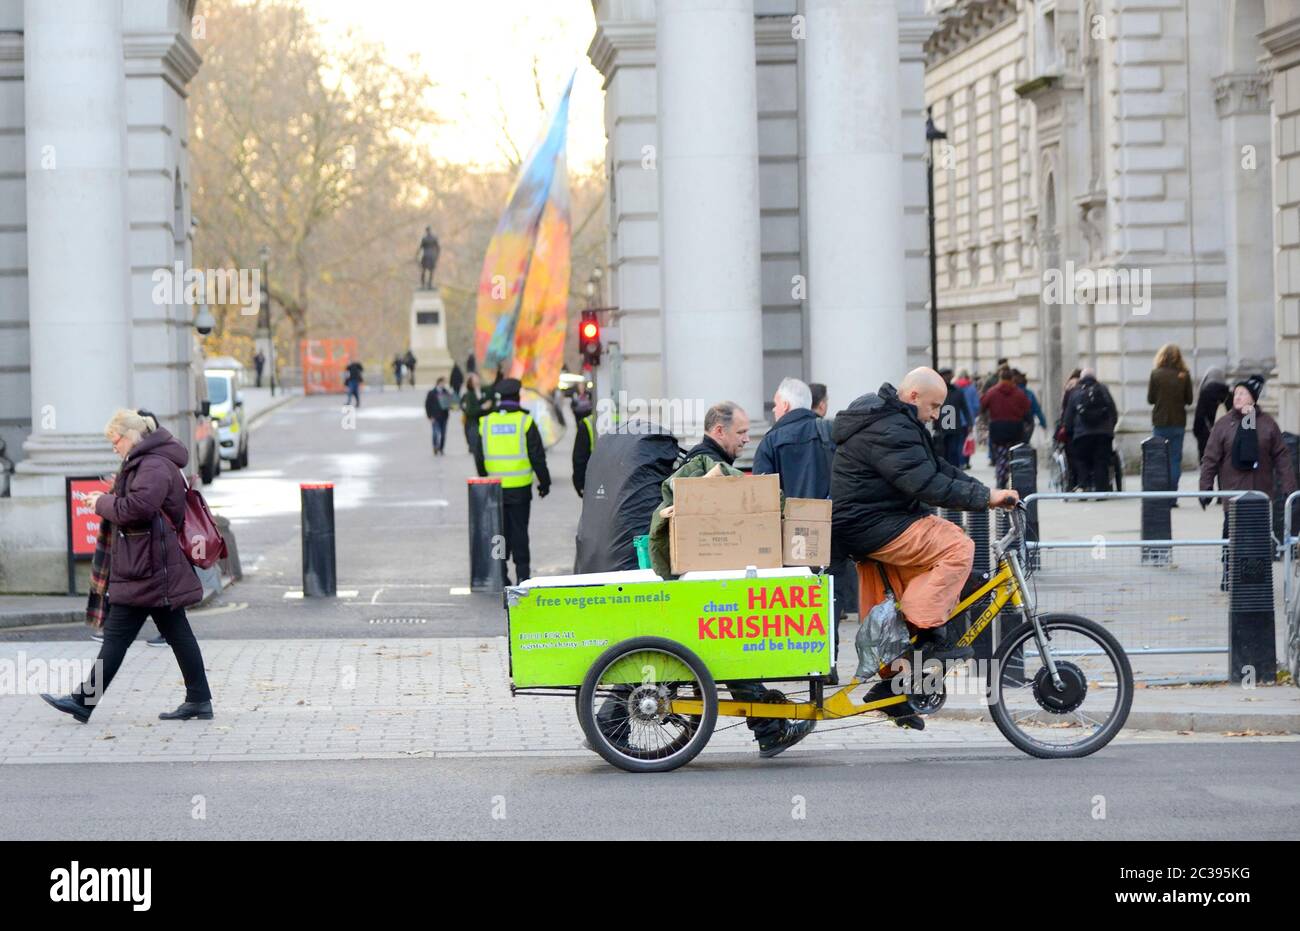 London, England, UK. Man riding a Hare Krishna bike in Whitehall delivering free vegetarian meals Stock Photo